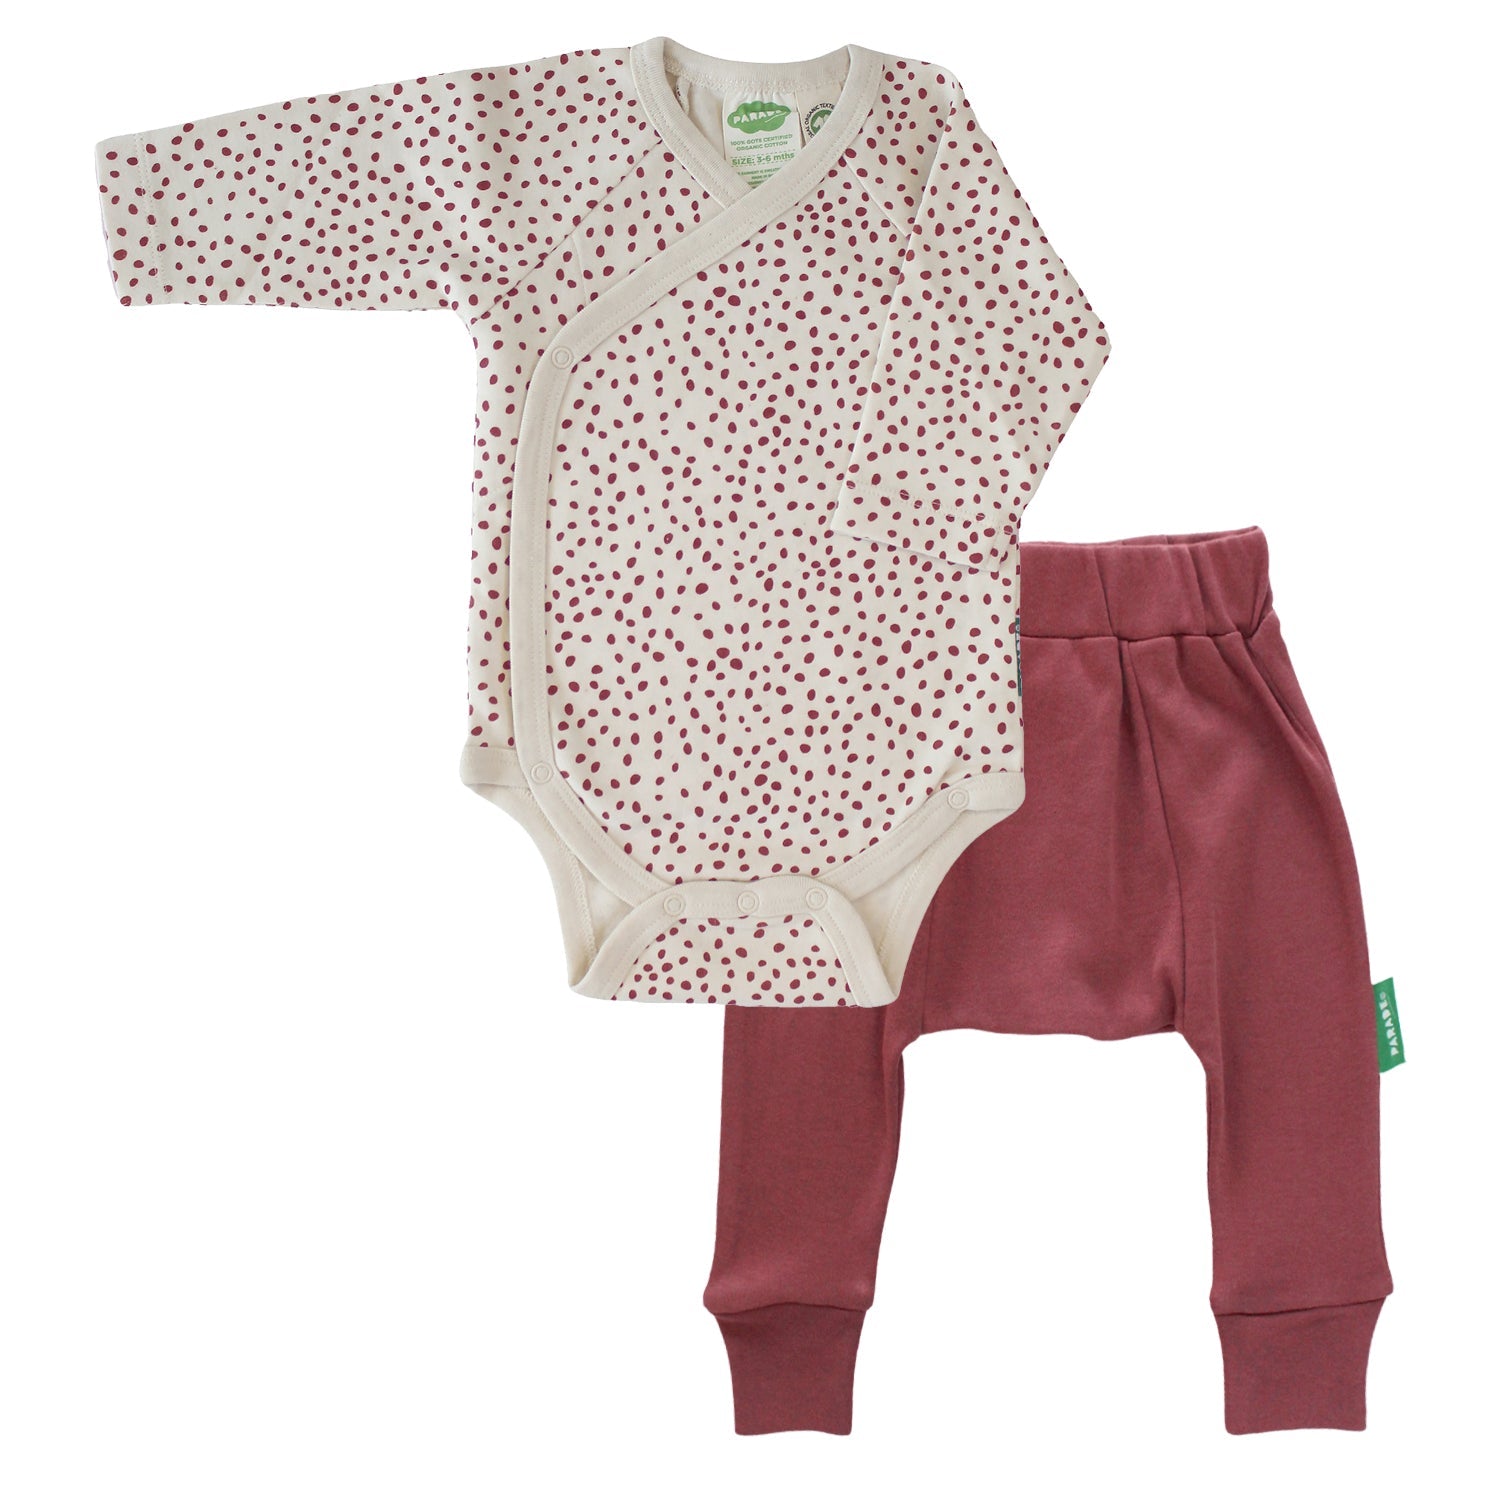 Onesie Playsuit Bundle - Long Sleeve - Organic Baby Clothes, Kids Clothes, & Gifts | Parade Organics